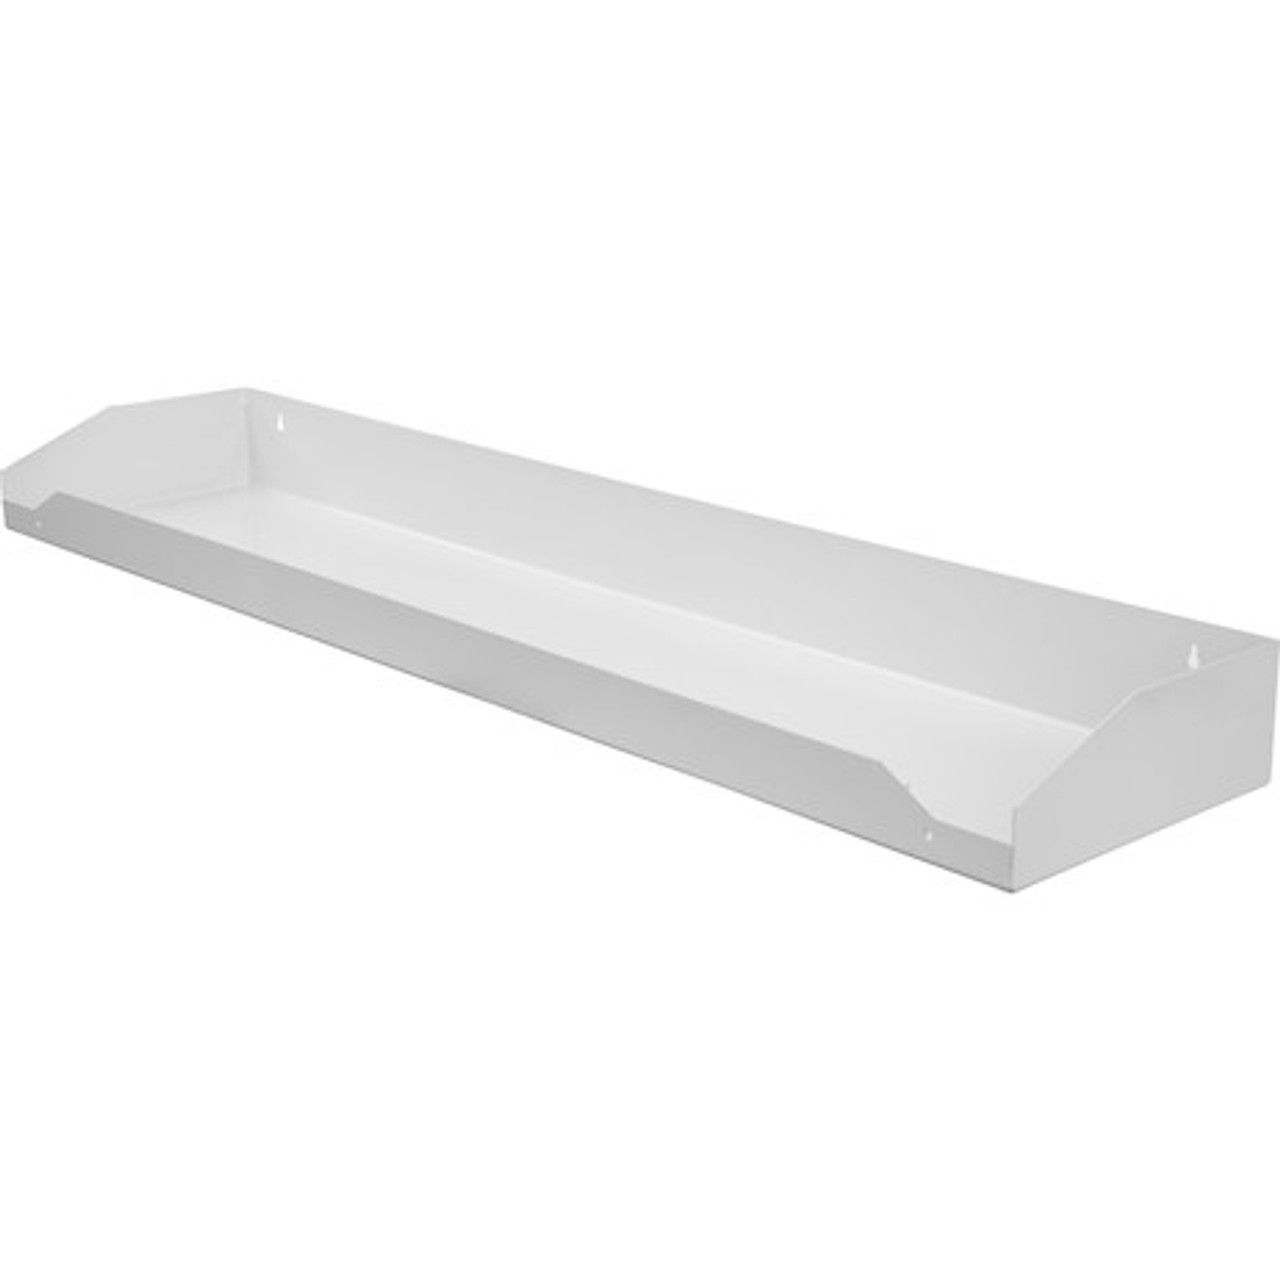 1702860TRAY - Interior Storage Tray for 16X13X96 Inch White Steel Topsider Truck Box